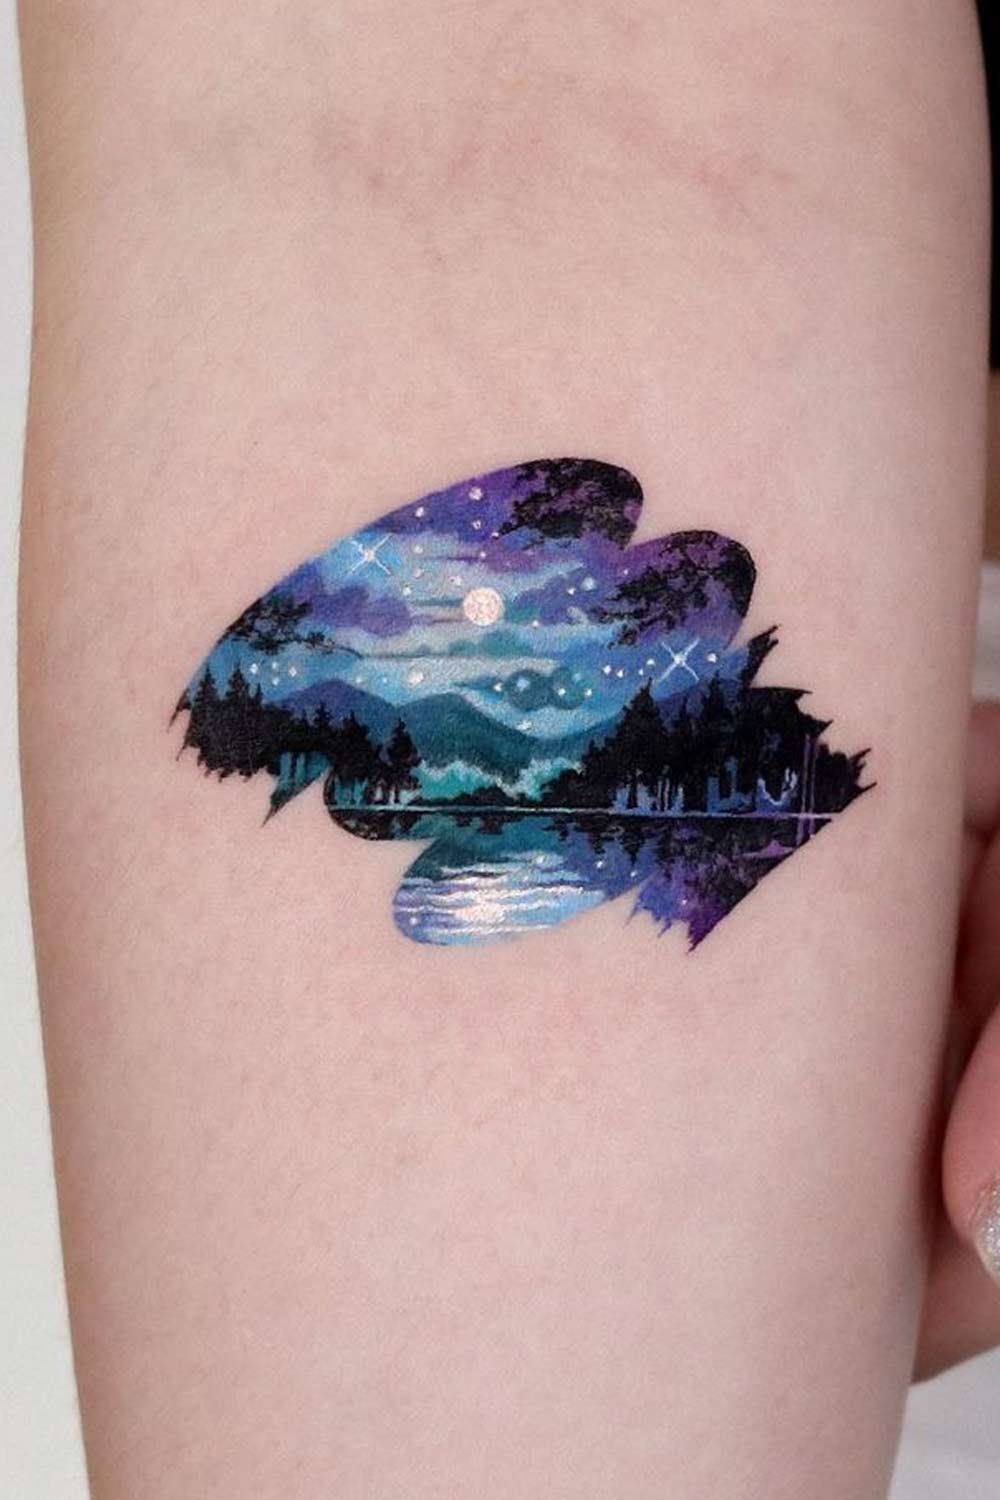 61 Gorgeous Looking Watercolor Tattoo Ideas